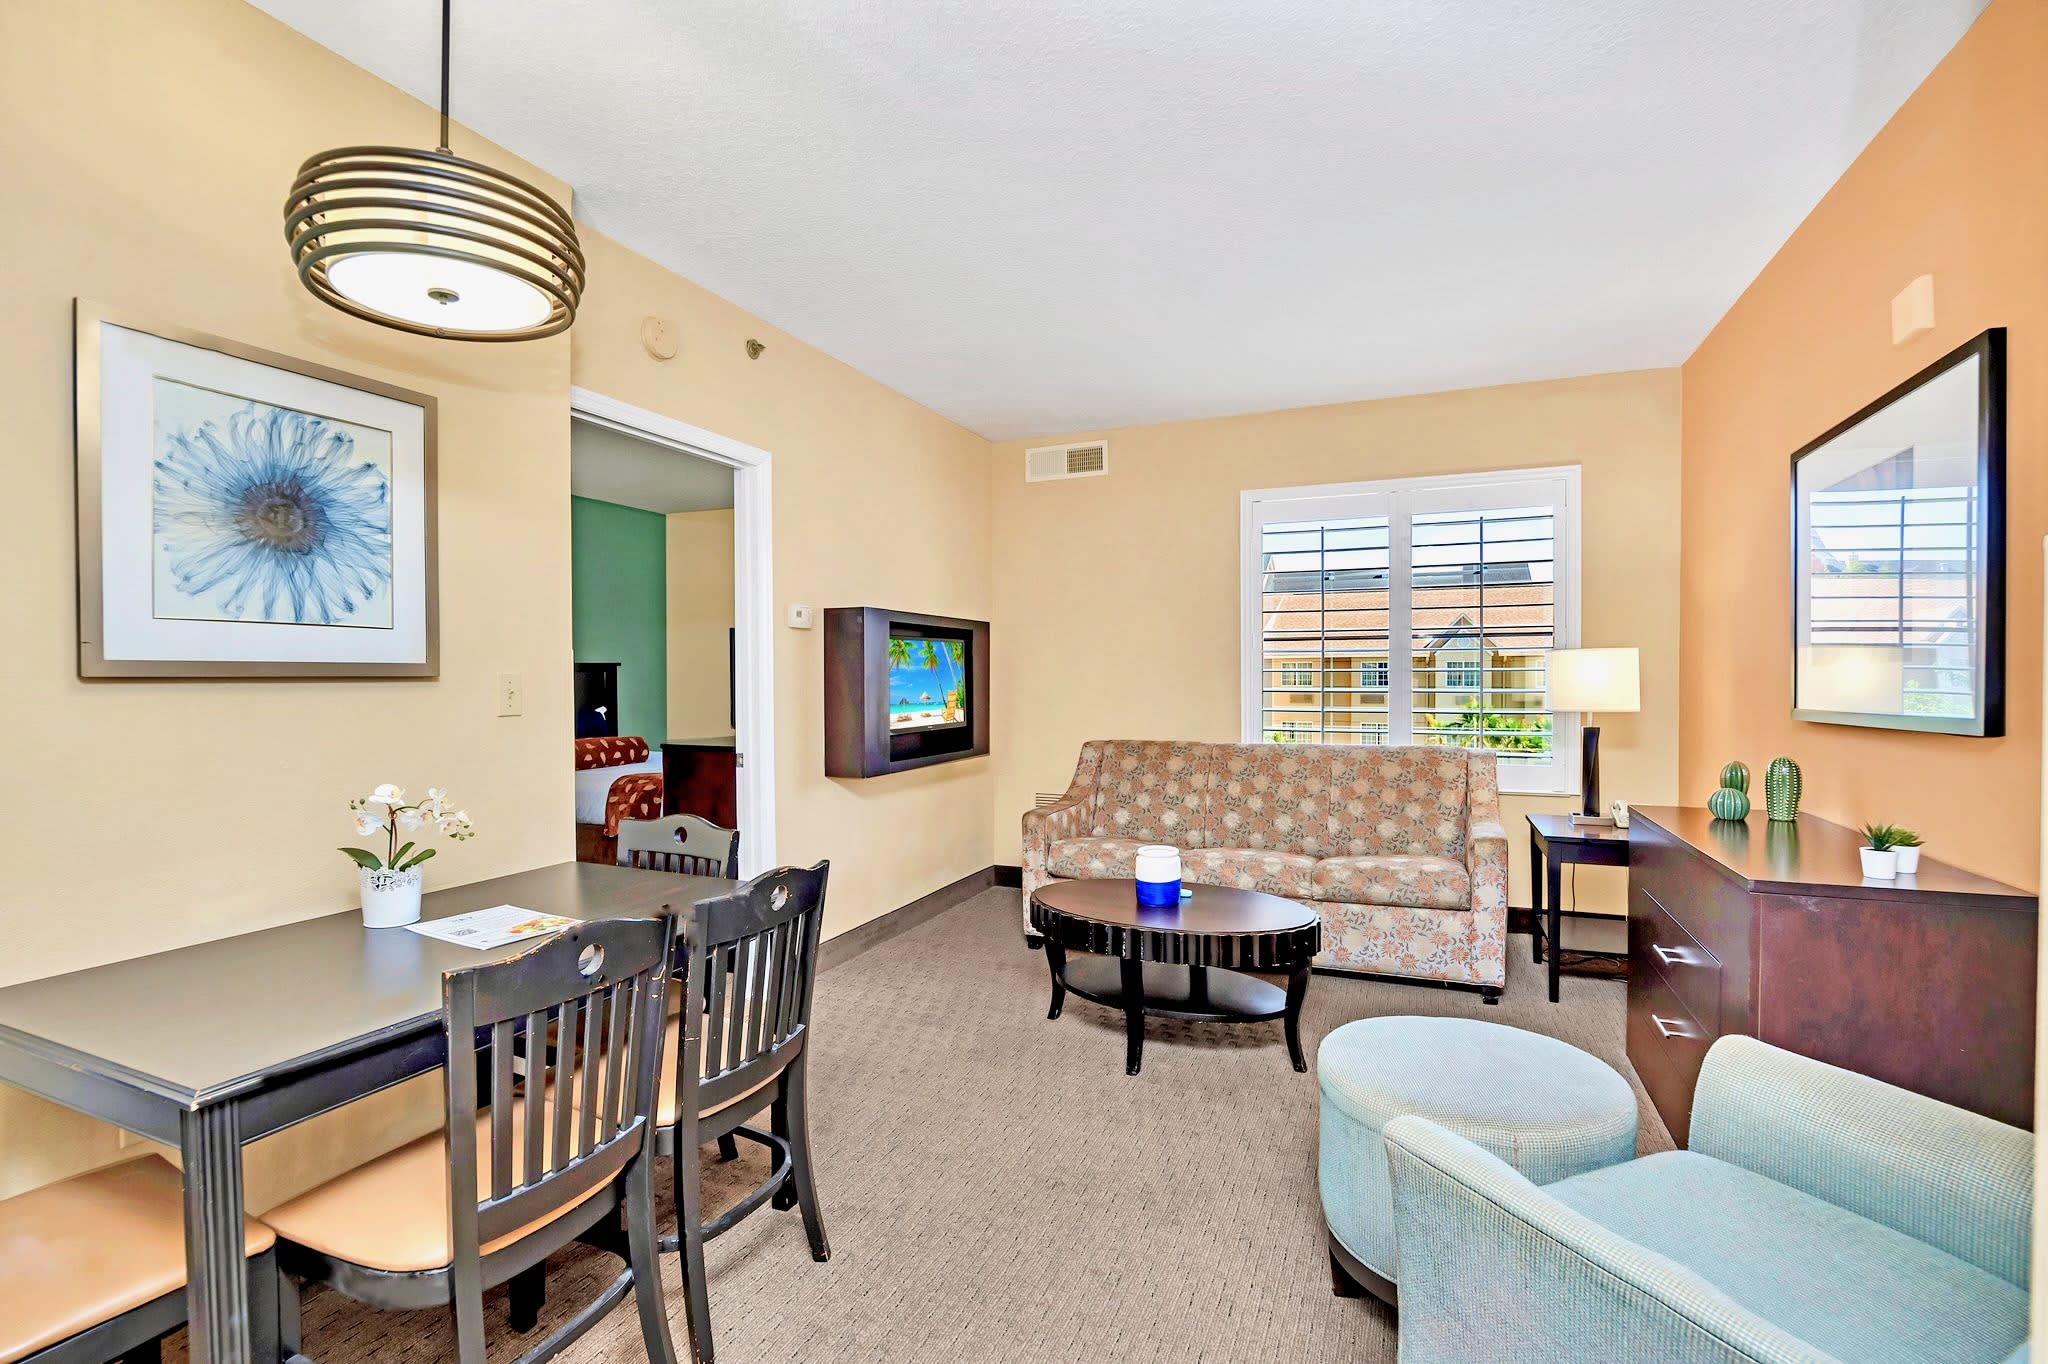 Apartment Suite w Pool and Hot Tub Near Disney